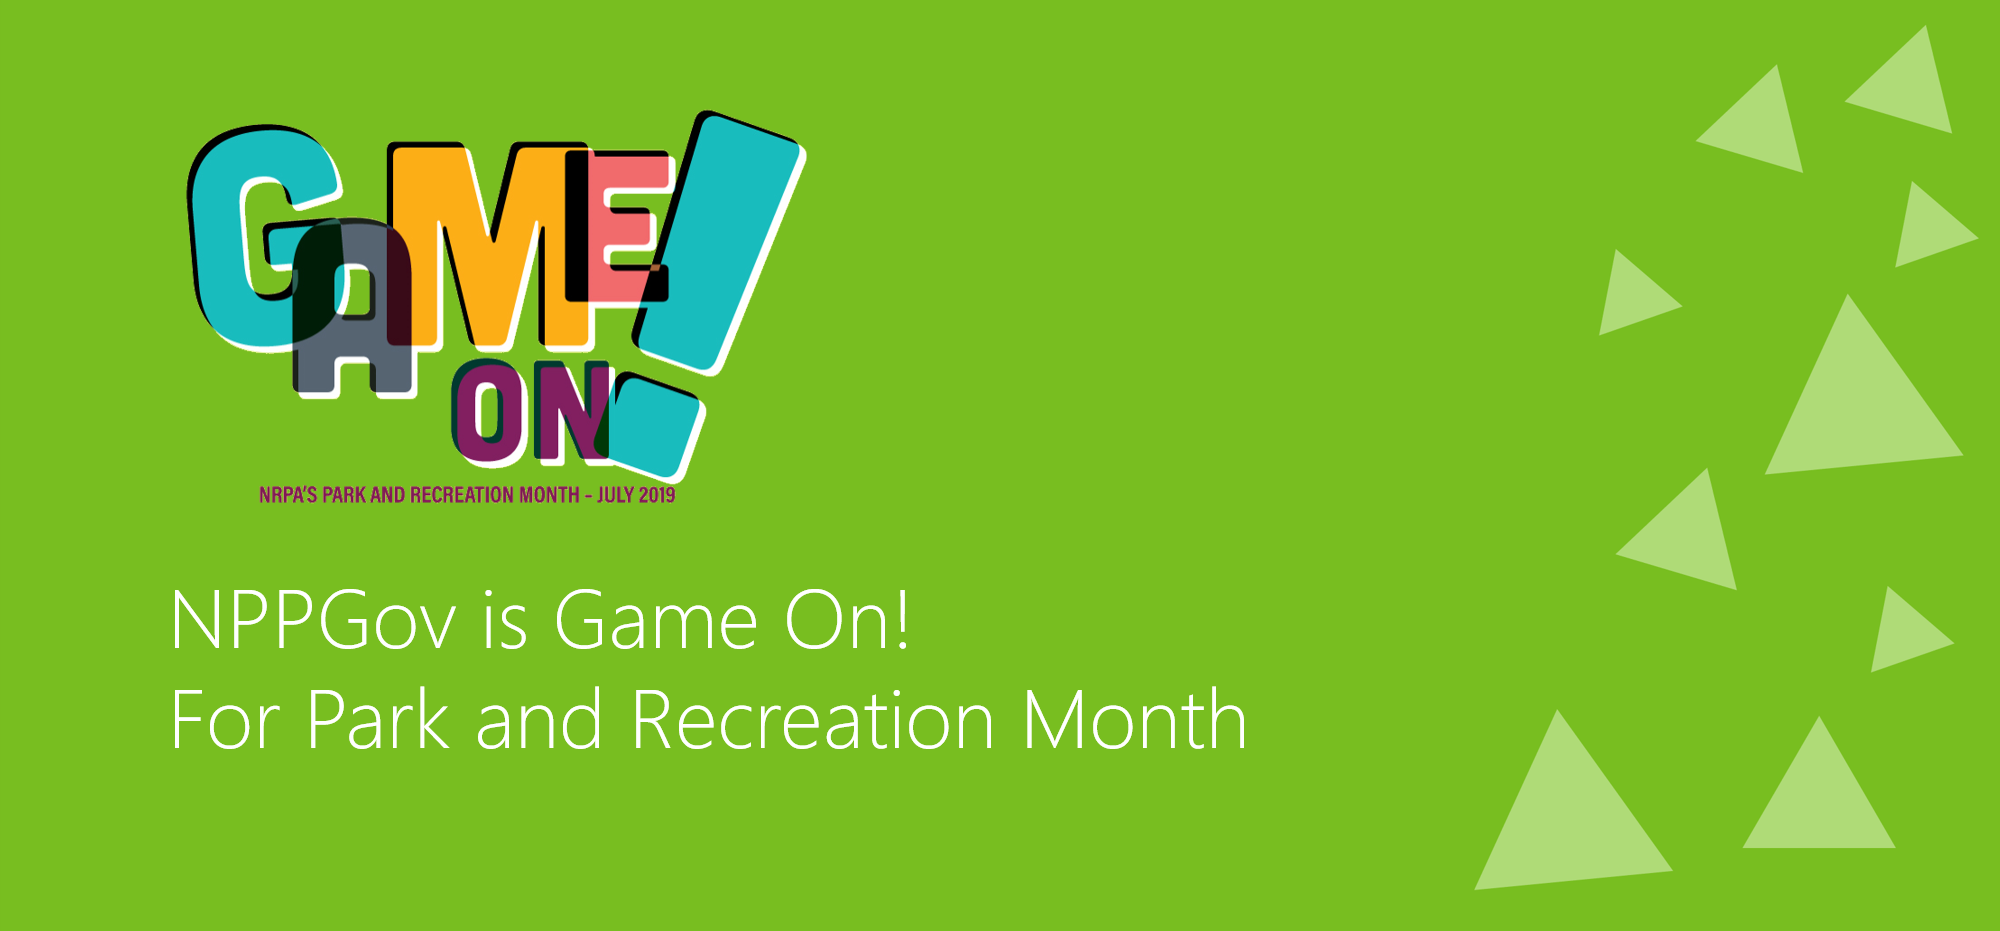 NPPGov is Game On! for Park and Recreation Month